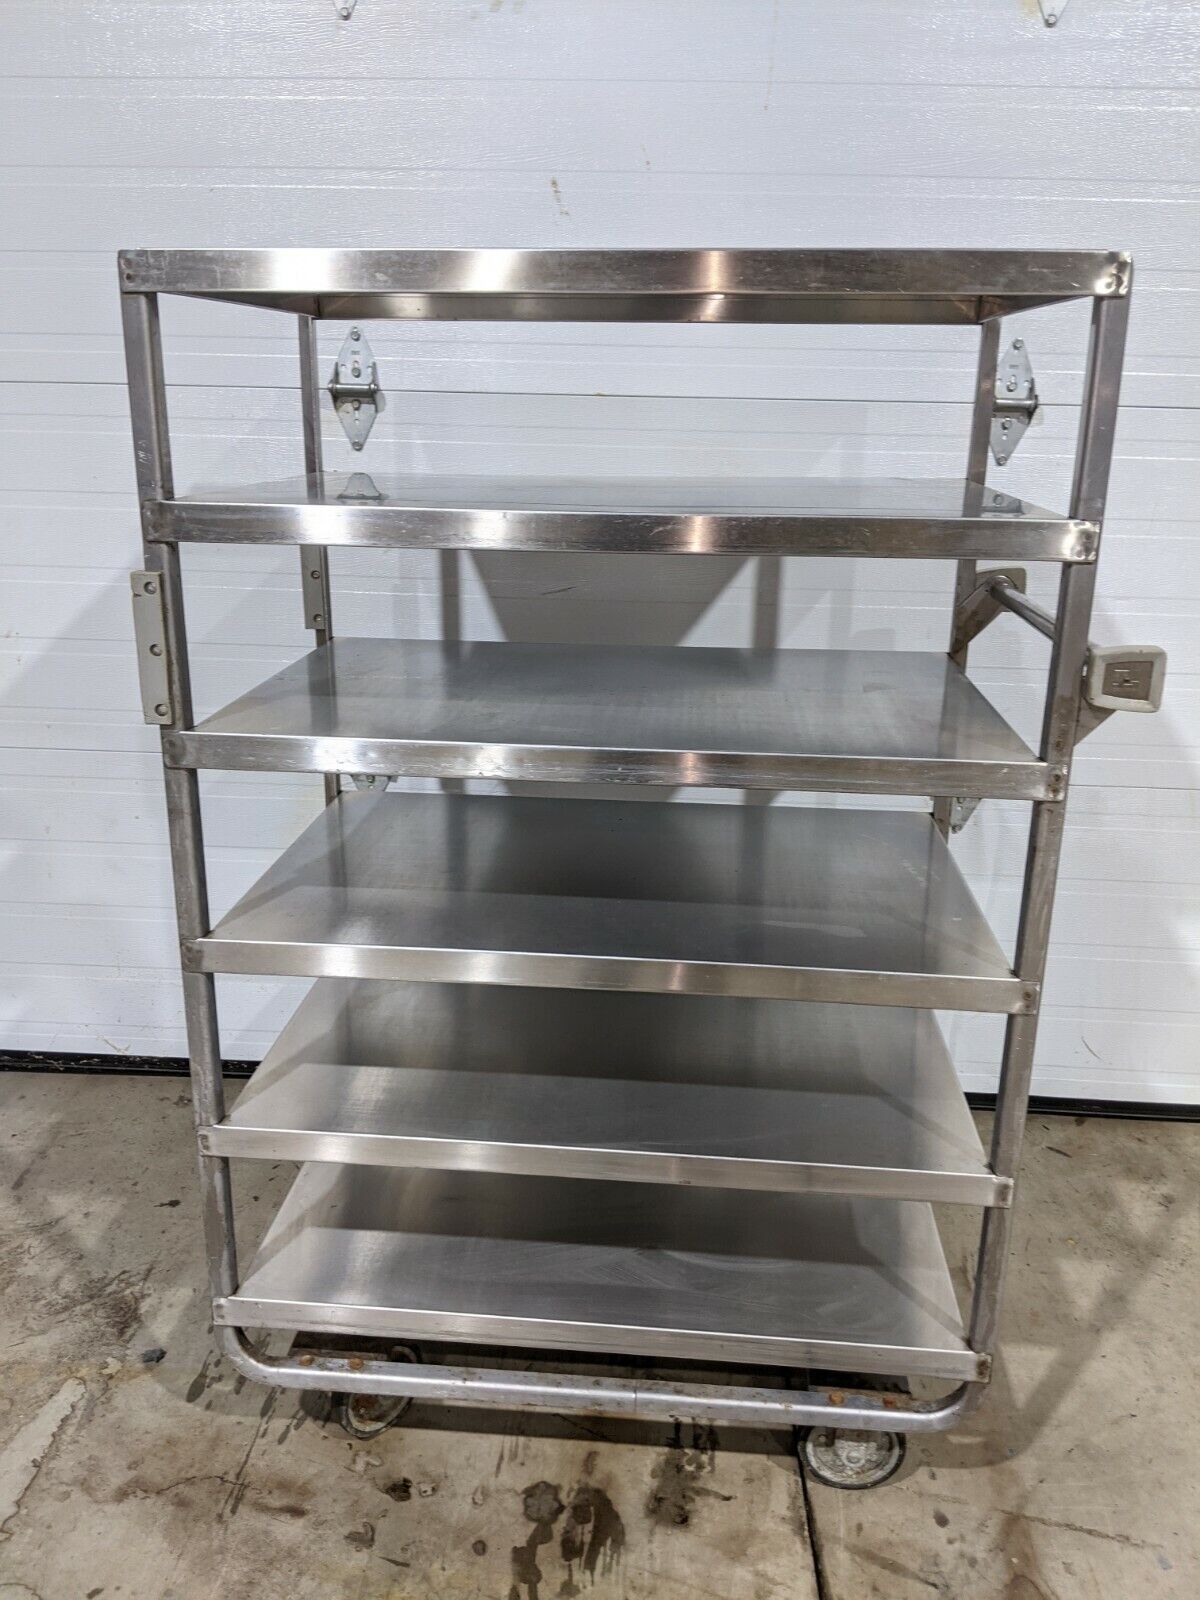 Lakeside 733 Queen Mary Cart - 6 Levels, 700 Lb. Capacity, Stainless, Flat Edge